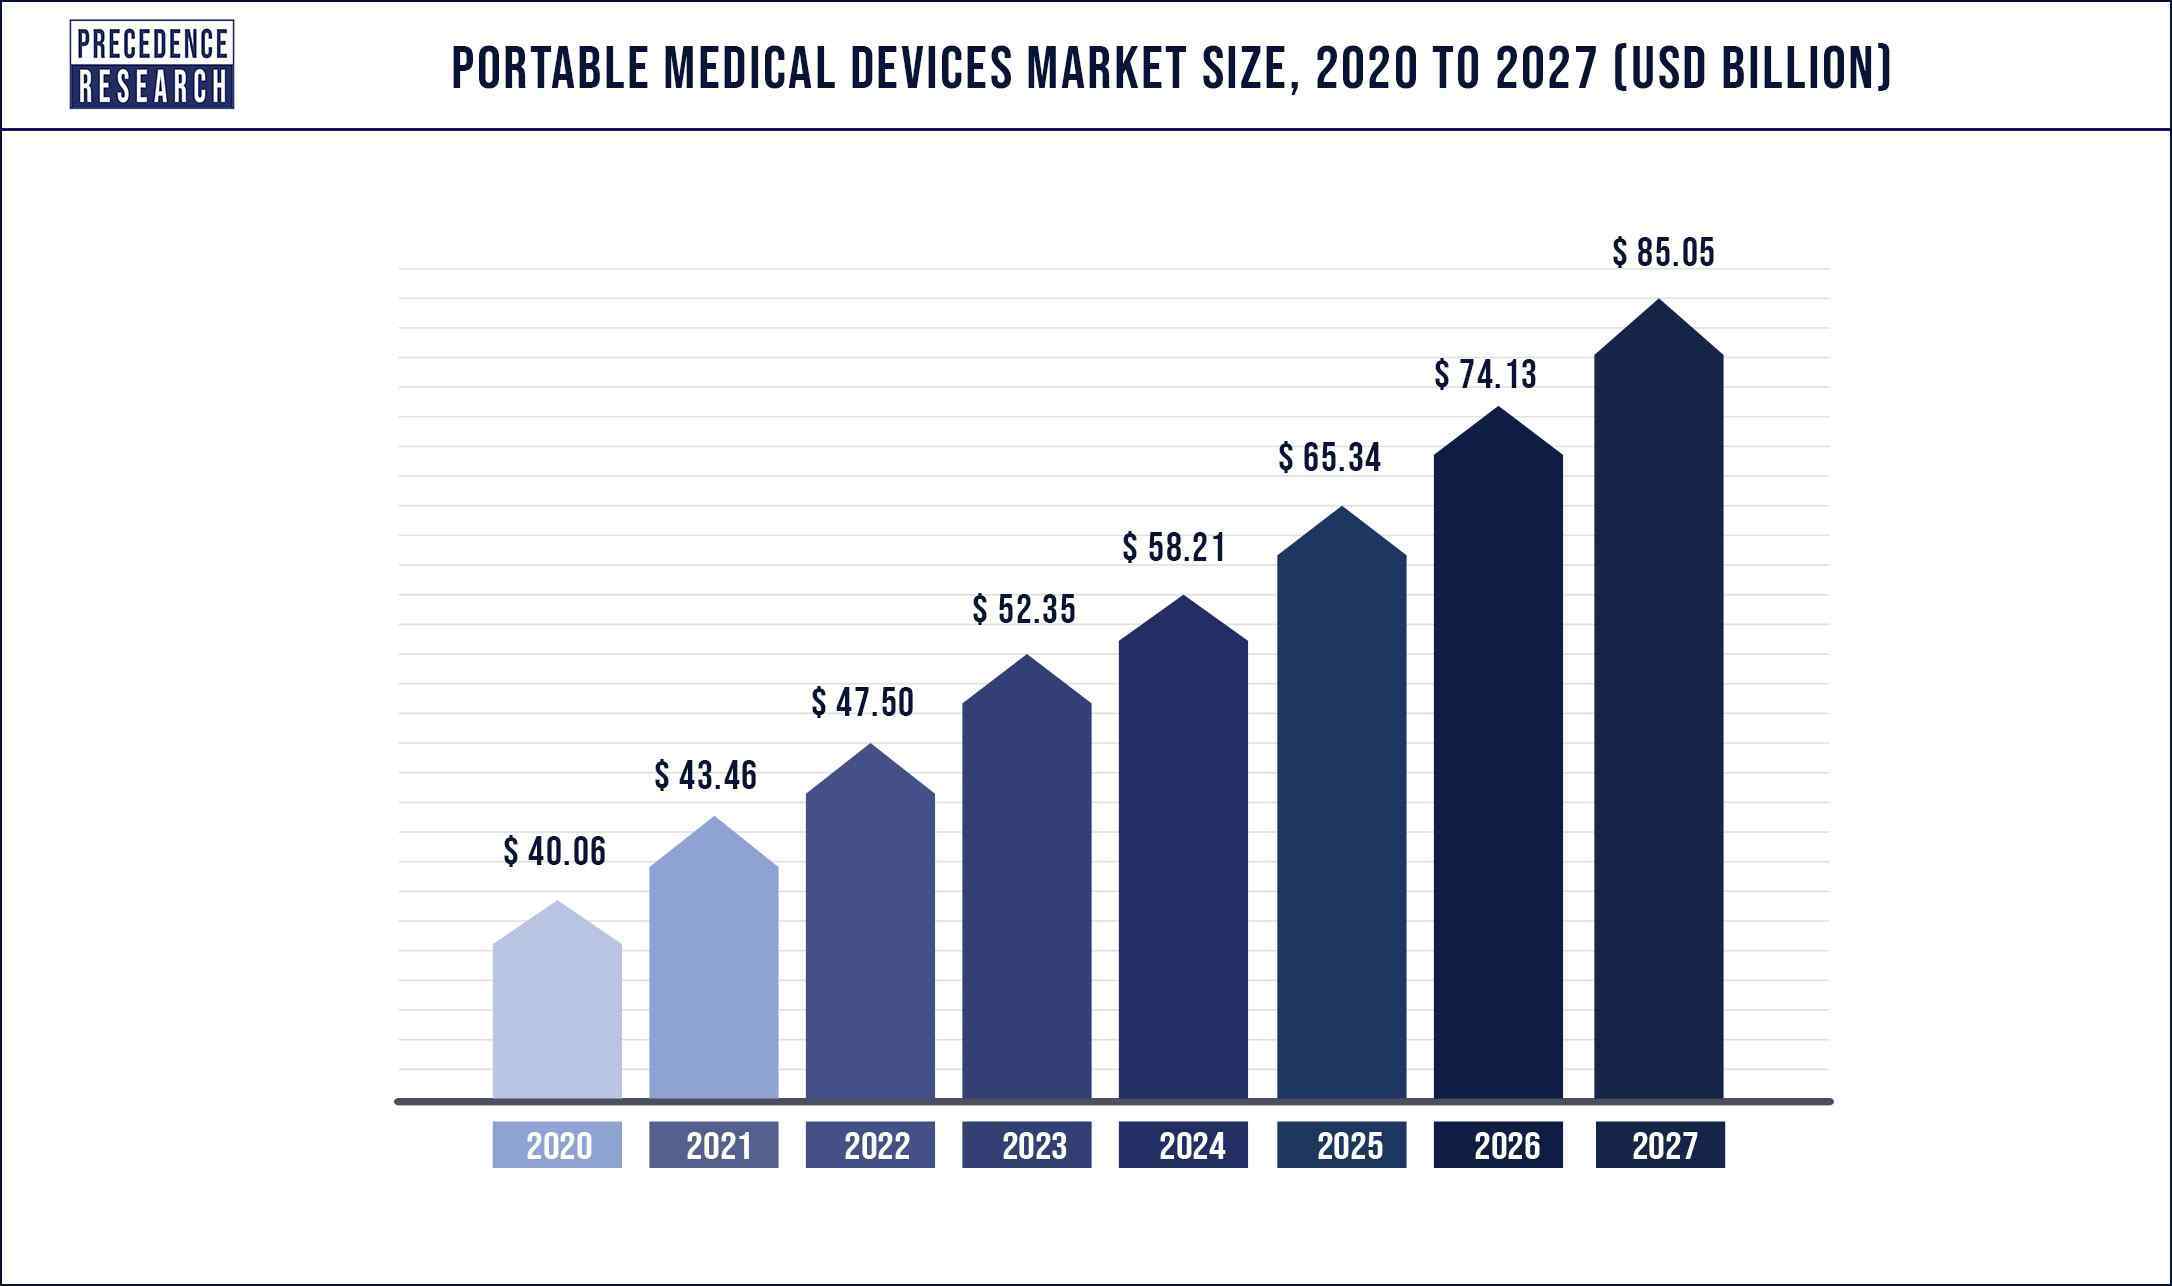 Portable Medical Devices Market Size 2020-2027